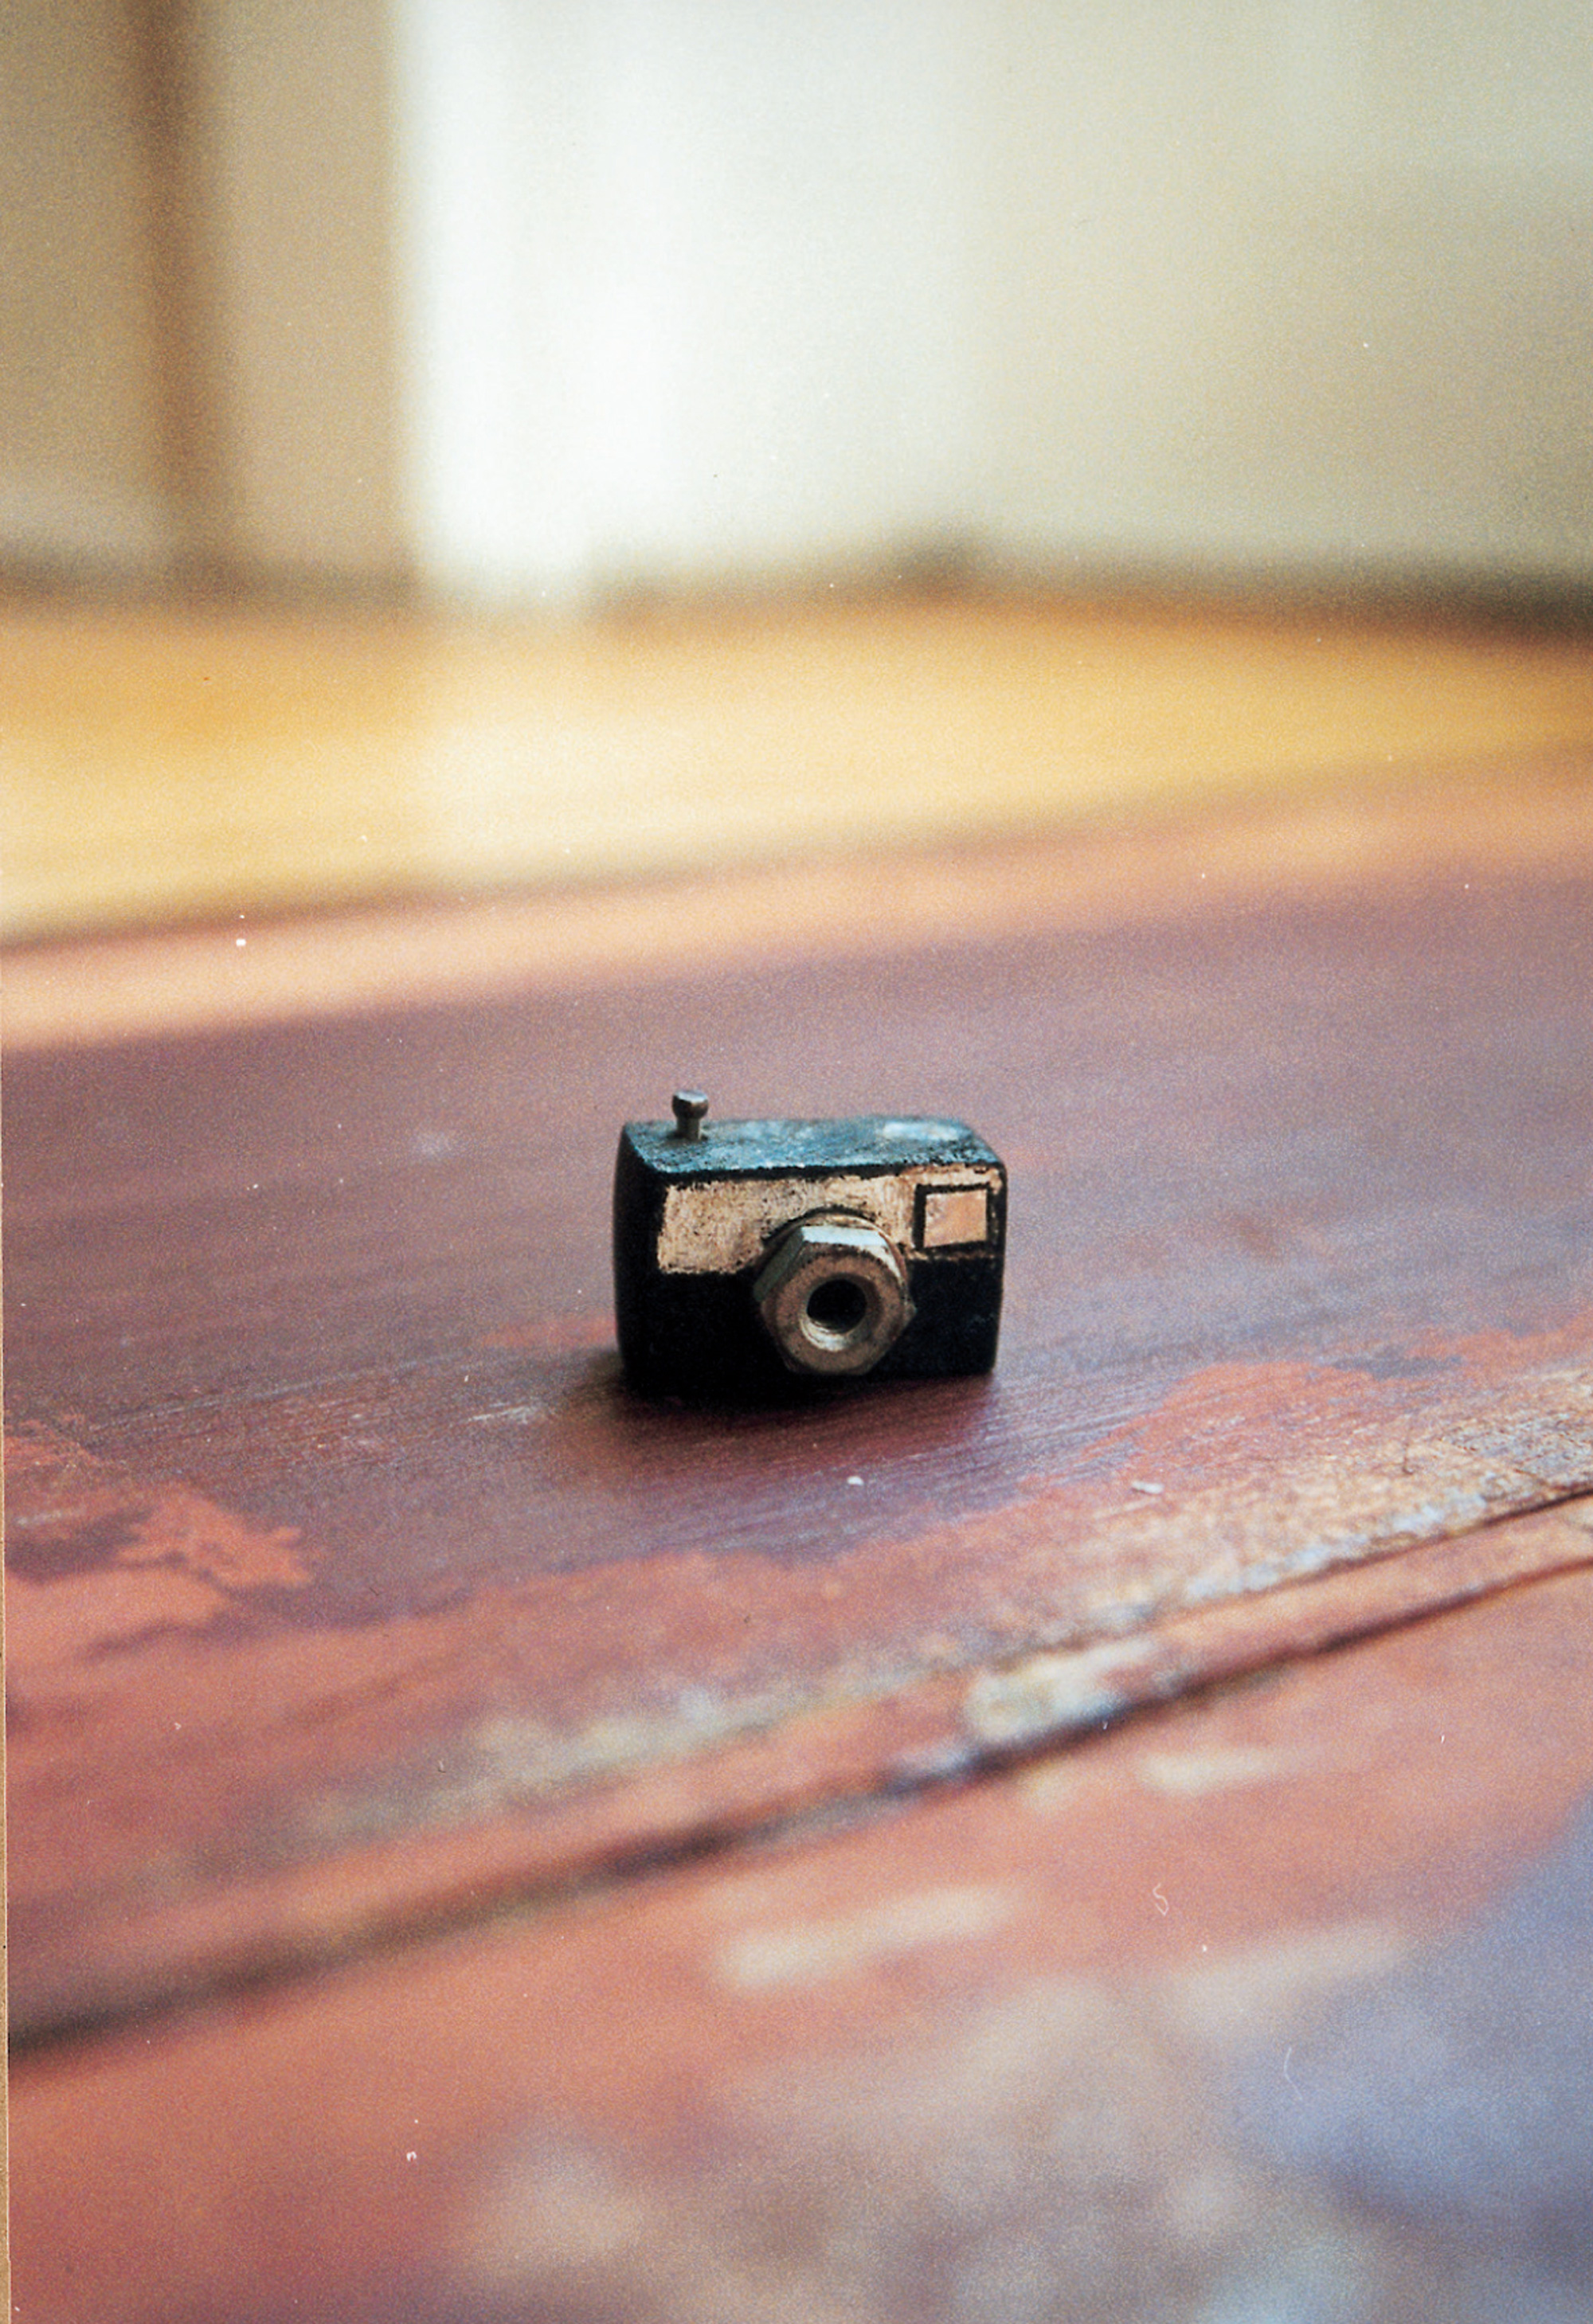 Camera. Rectangular block of wood painted black with a white strip accenting the front, where a nut and washer together form the lens. The viewfinder window is indicated on this side by a small rectangle of silver metallic paper or tape inset in the white strip and outlined in black. On the top of the camera the head of a small nail driven most of the way into the body of the camera represents the shutter release. On the back of the camera a small strip of yellow paper is glued to the center. On it is printed “1—1” to represent the exposure number. This camera, loaded with self-reflexive implications (and a full roll of film), also points to the voyeurism/exhibitionism so characteristic of Doll Games plots.